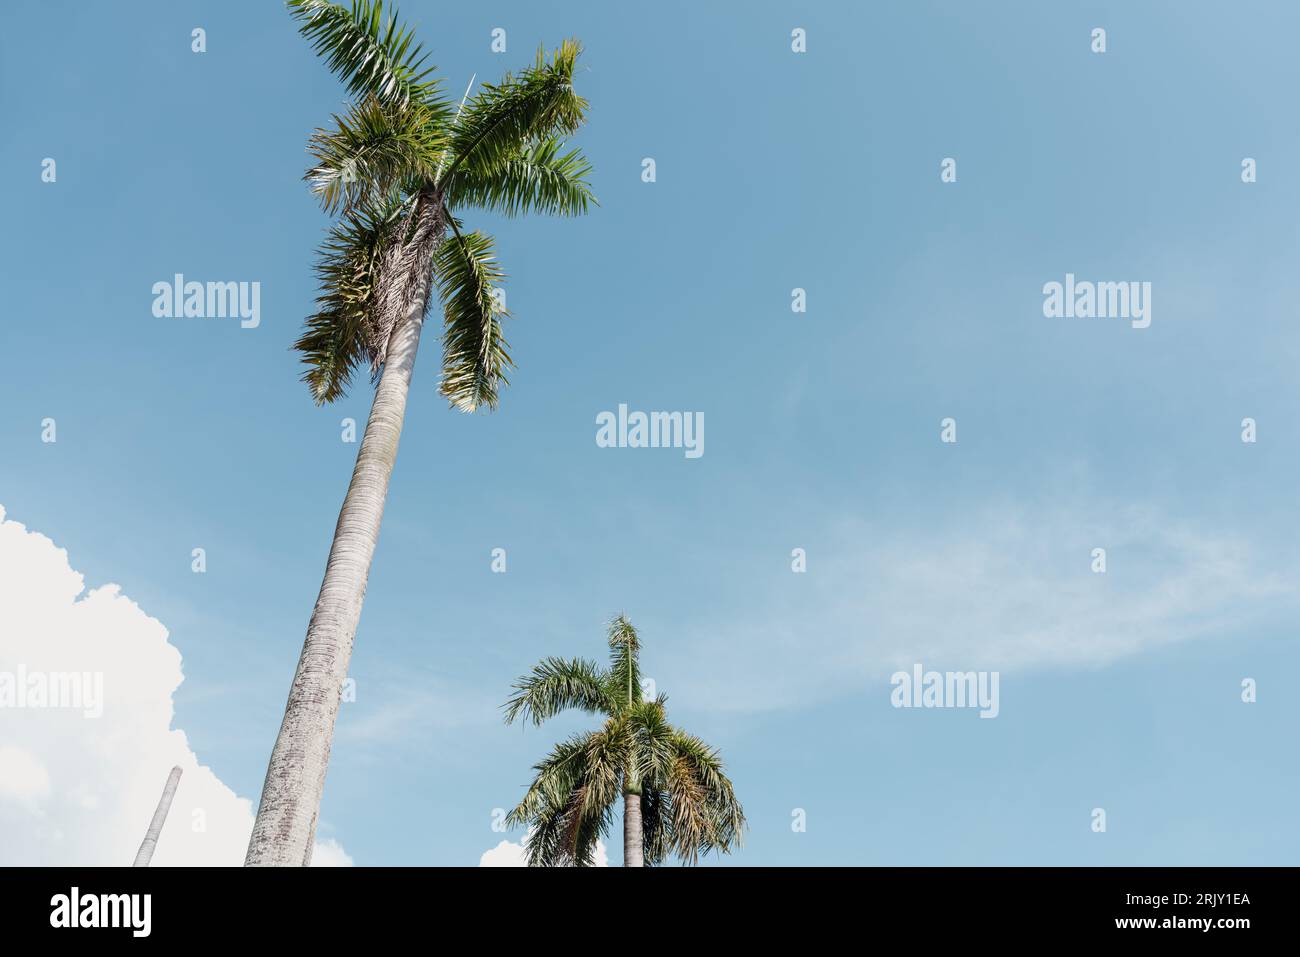 Palme und blauer Himmel in Georgetown in Penang, Malaysia Stockfoto